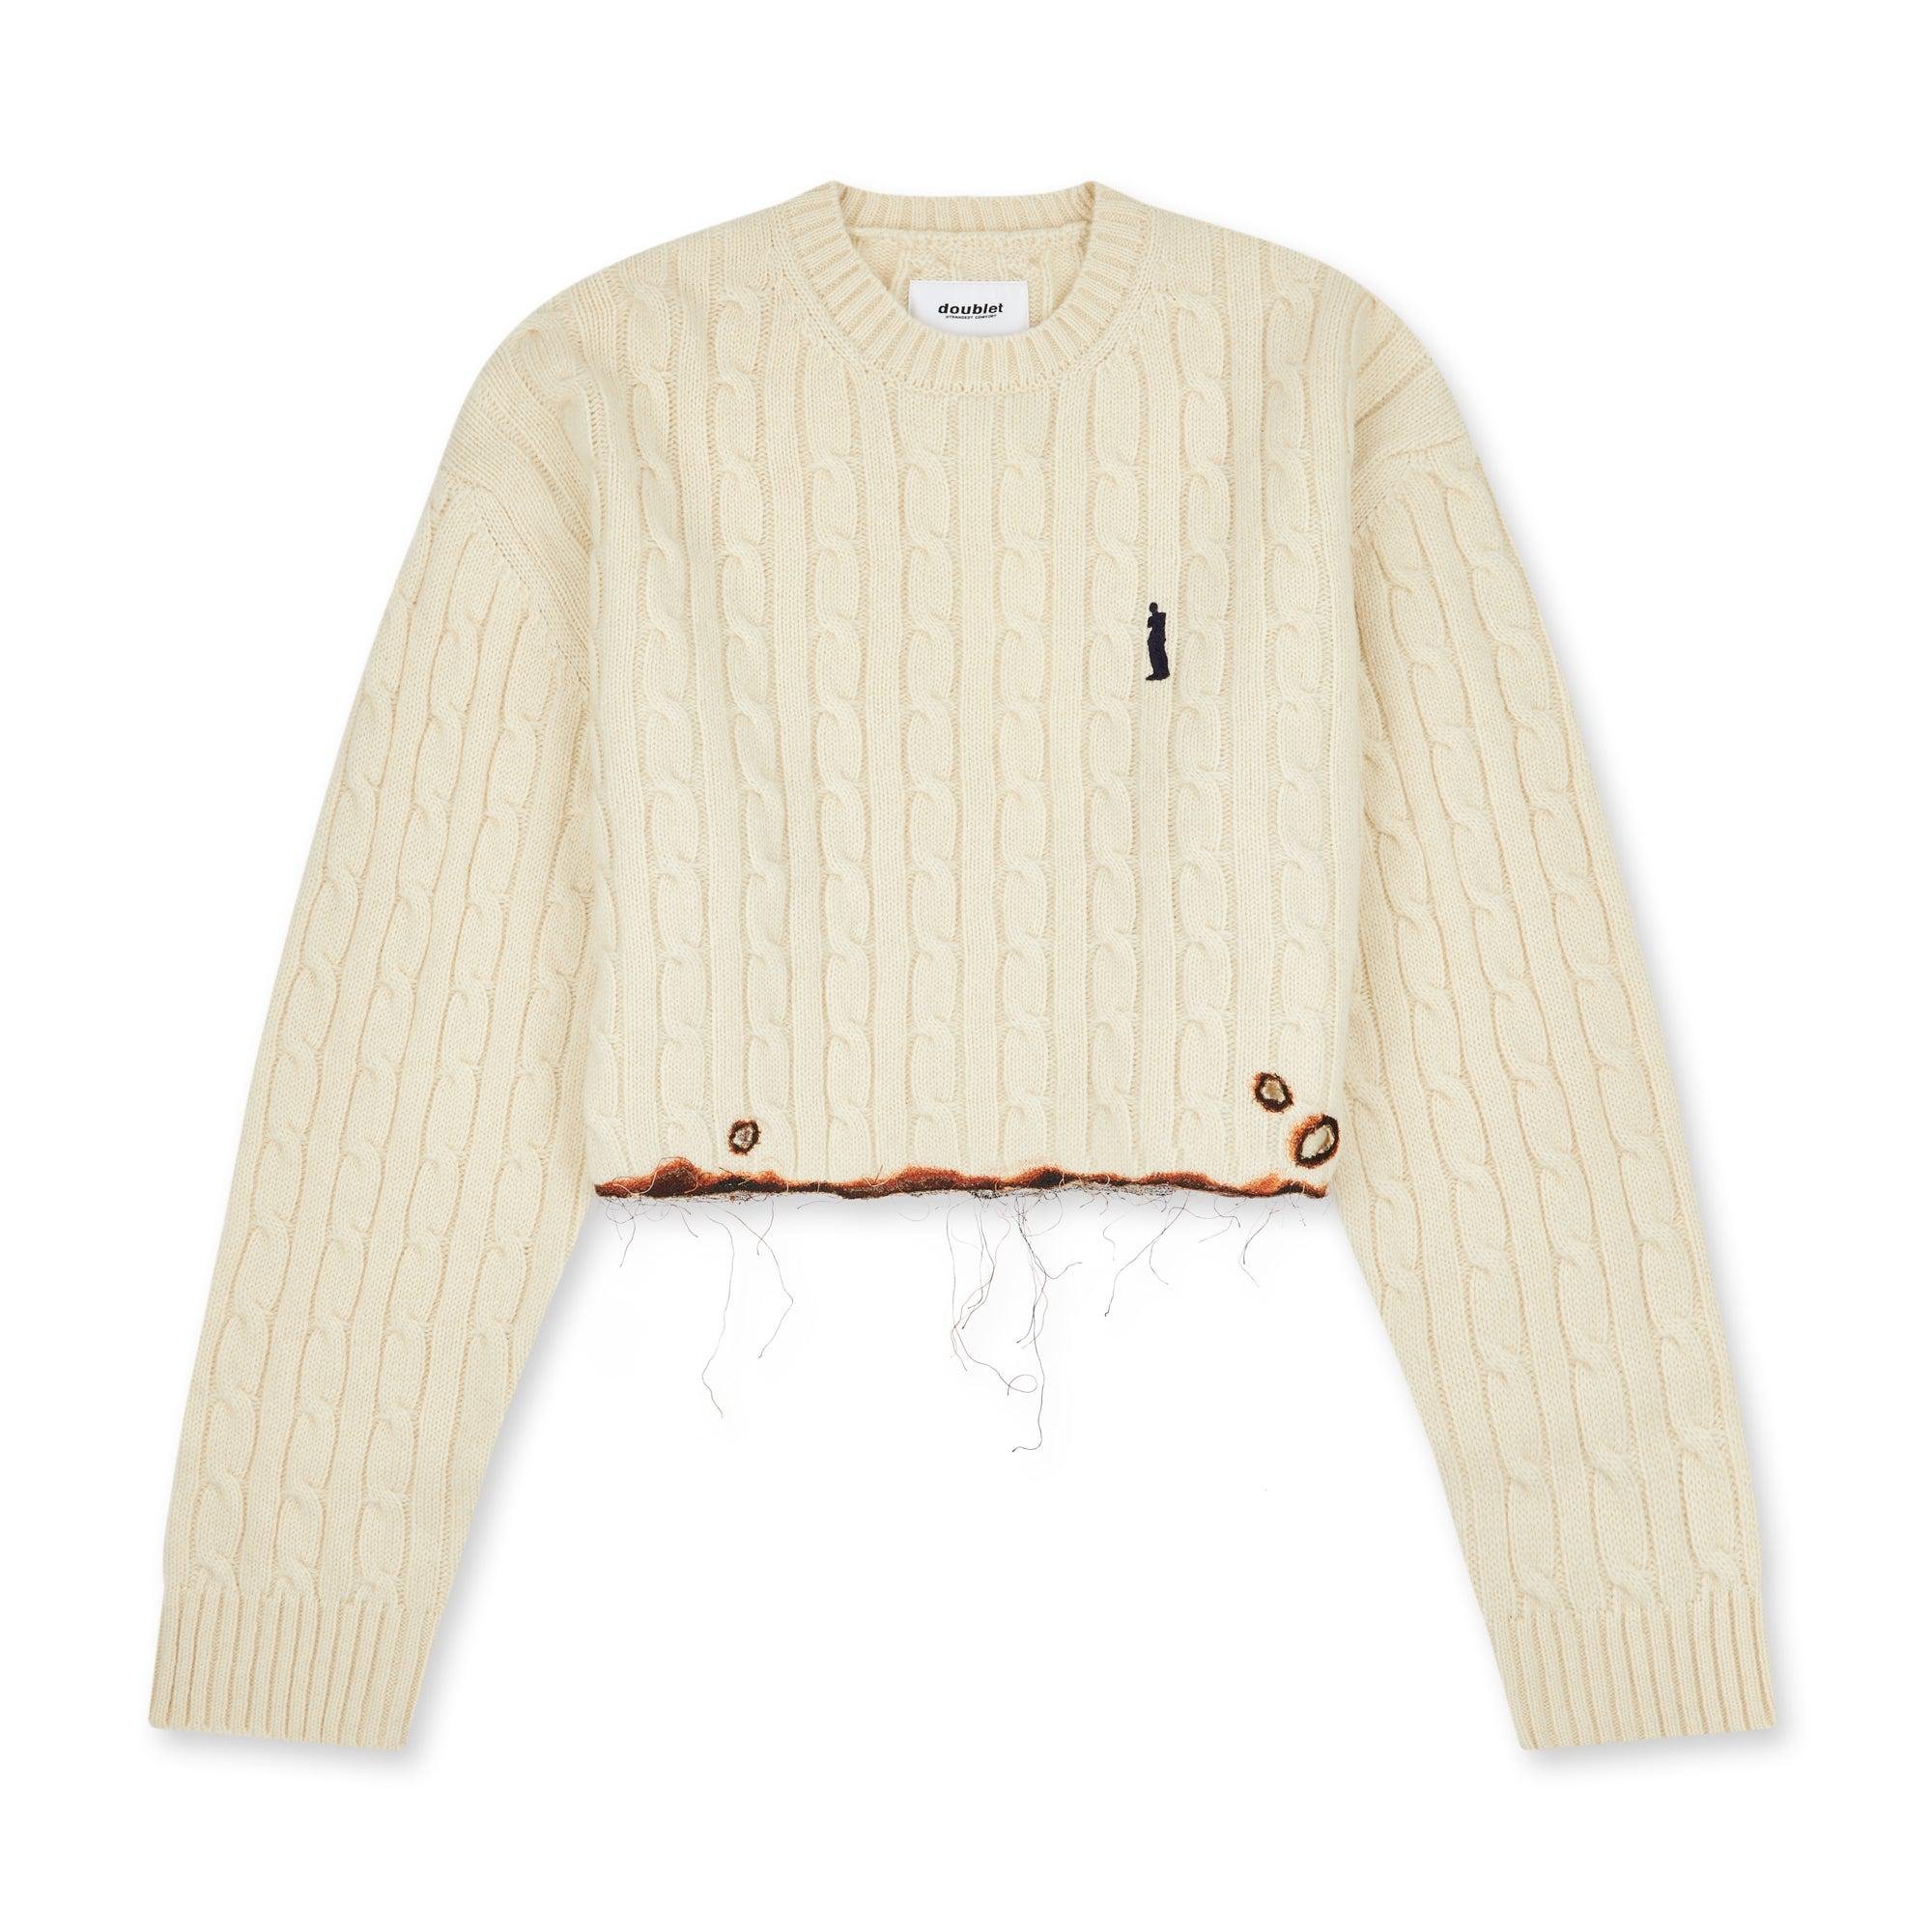 Doublet - Men's Burning Embroidery Knit Pullover - (Ivory) by